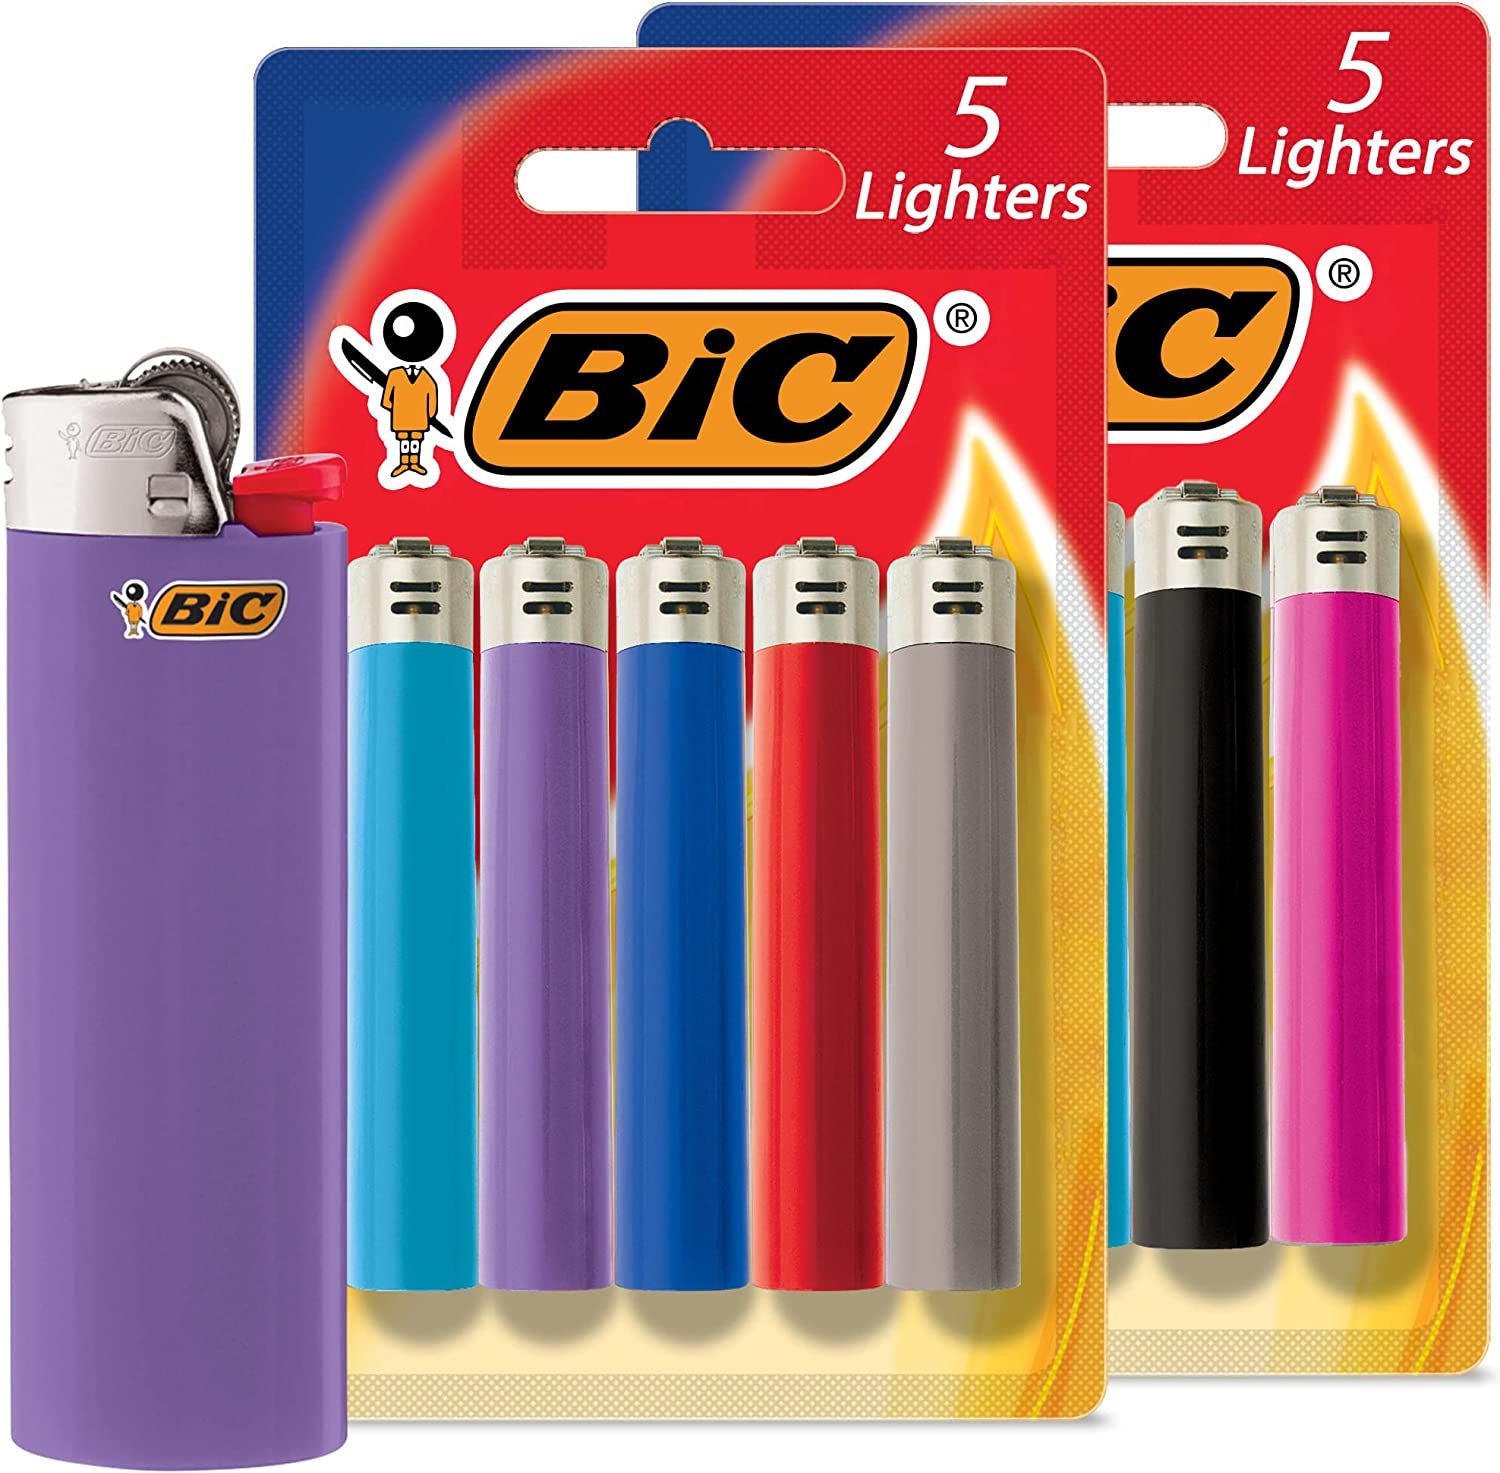 BIC Classic Pocket Lighter, Assorted Colors, Pack of 5 Lighters